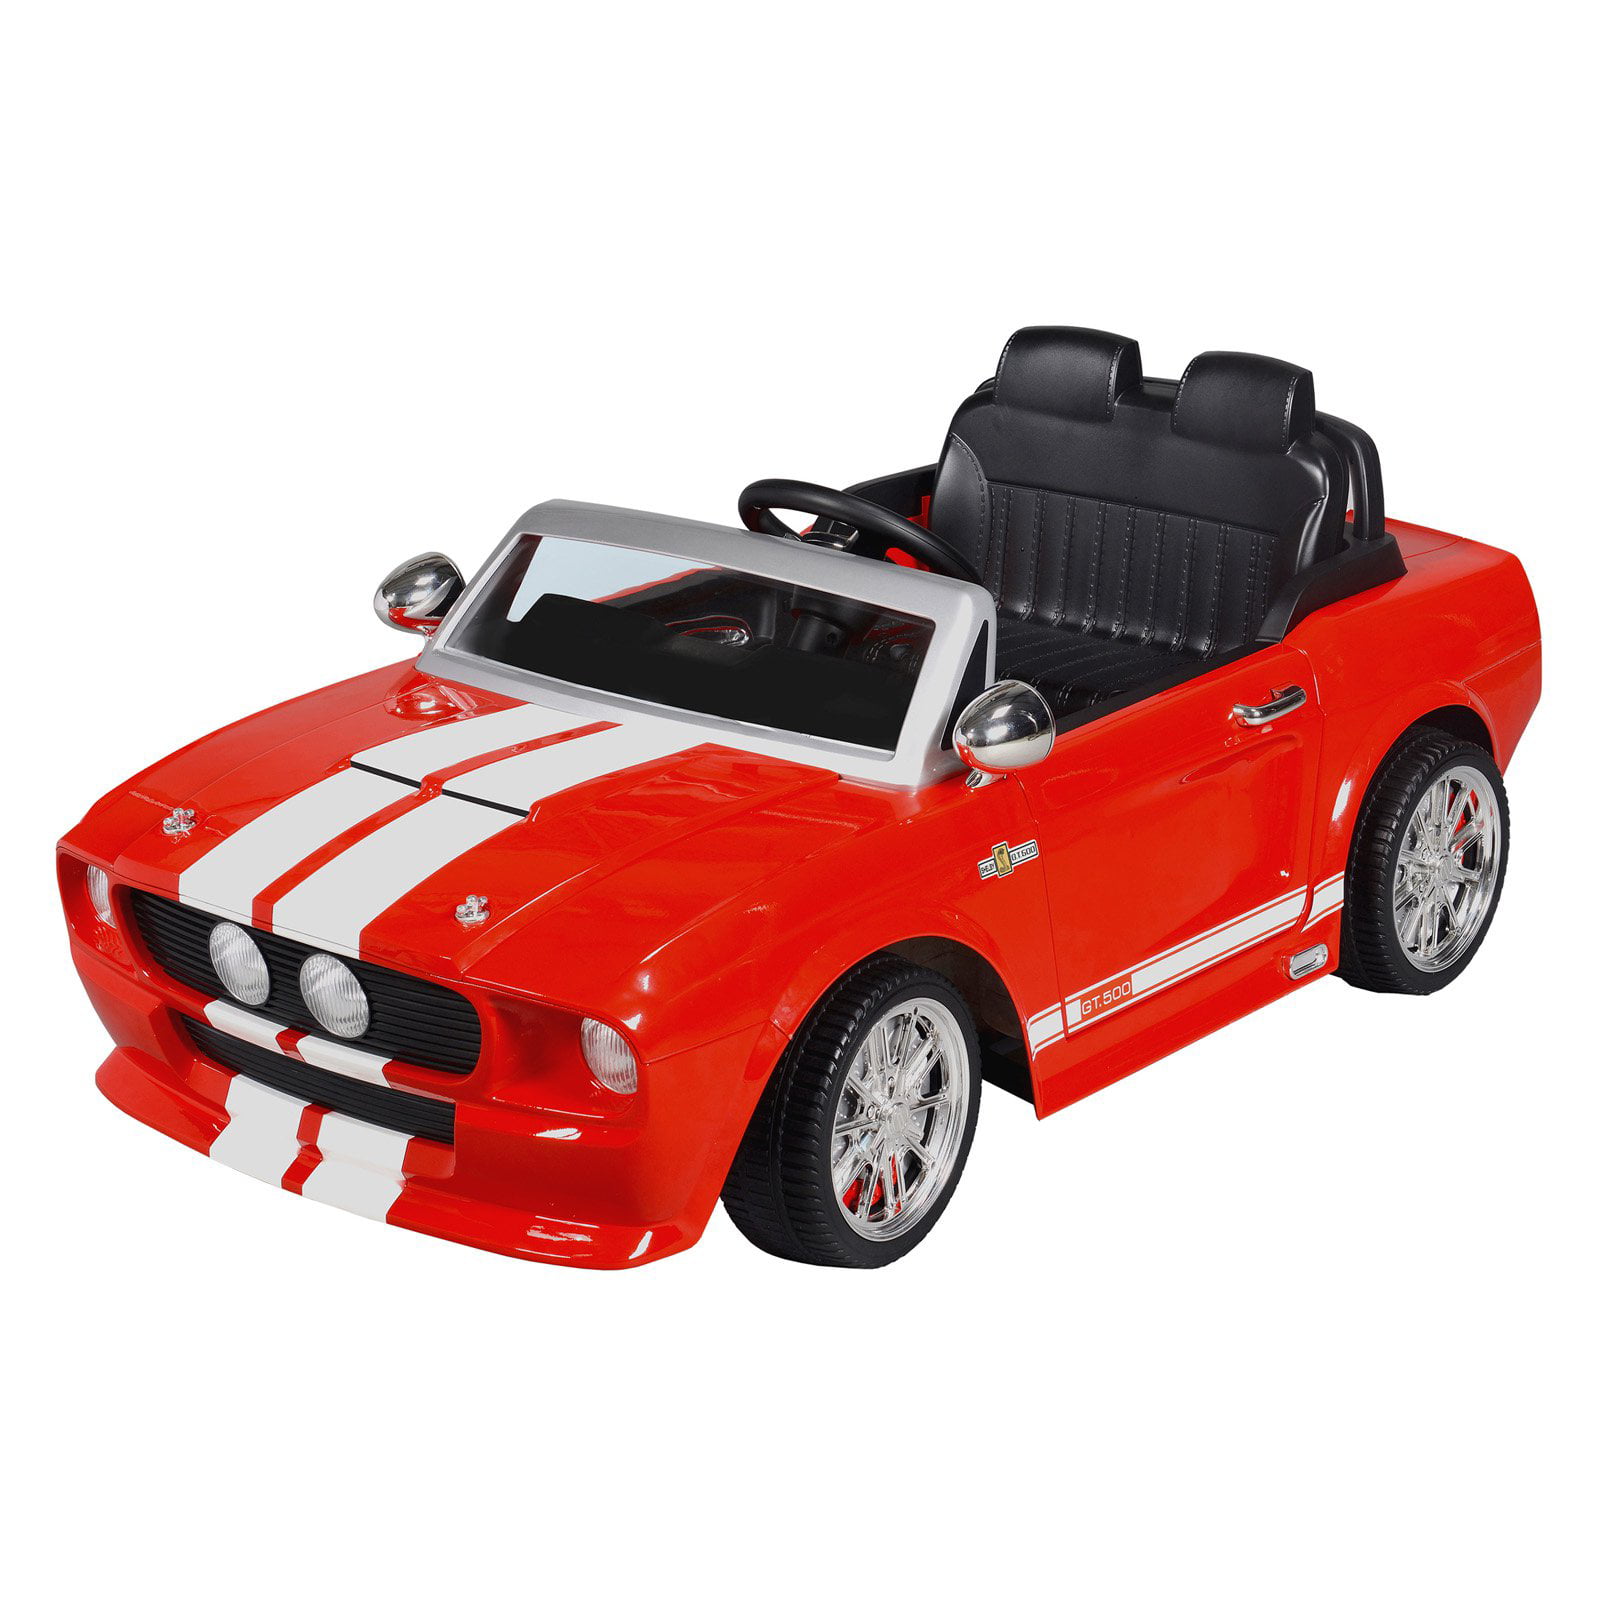 mustang ride on toy